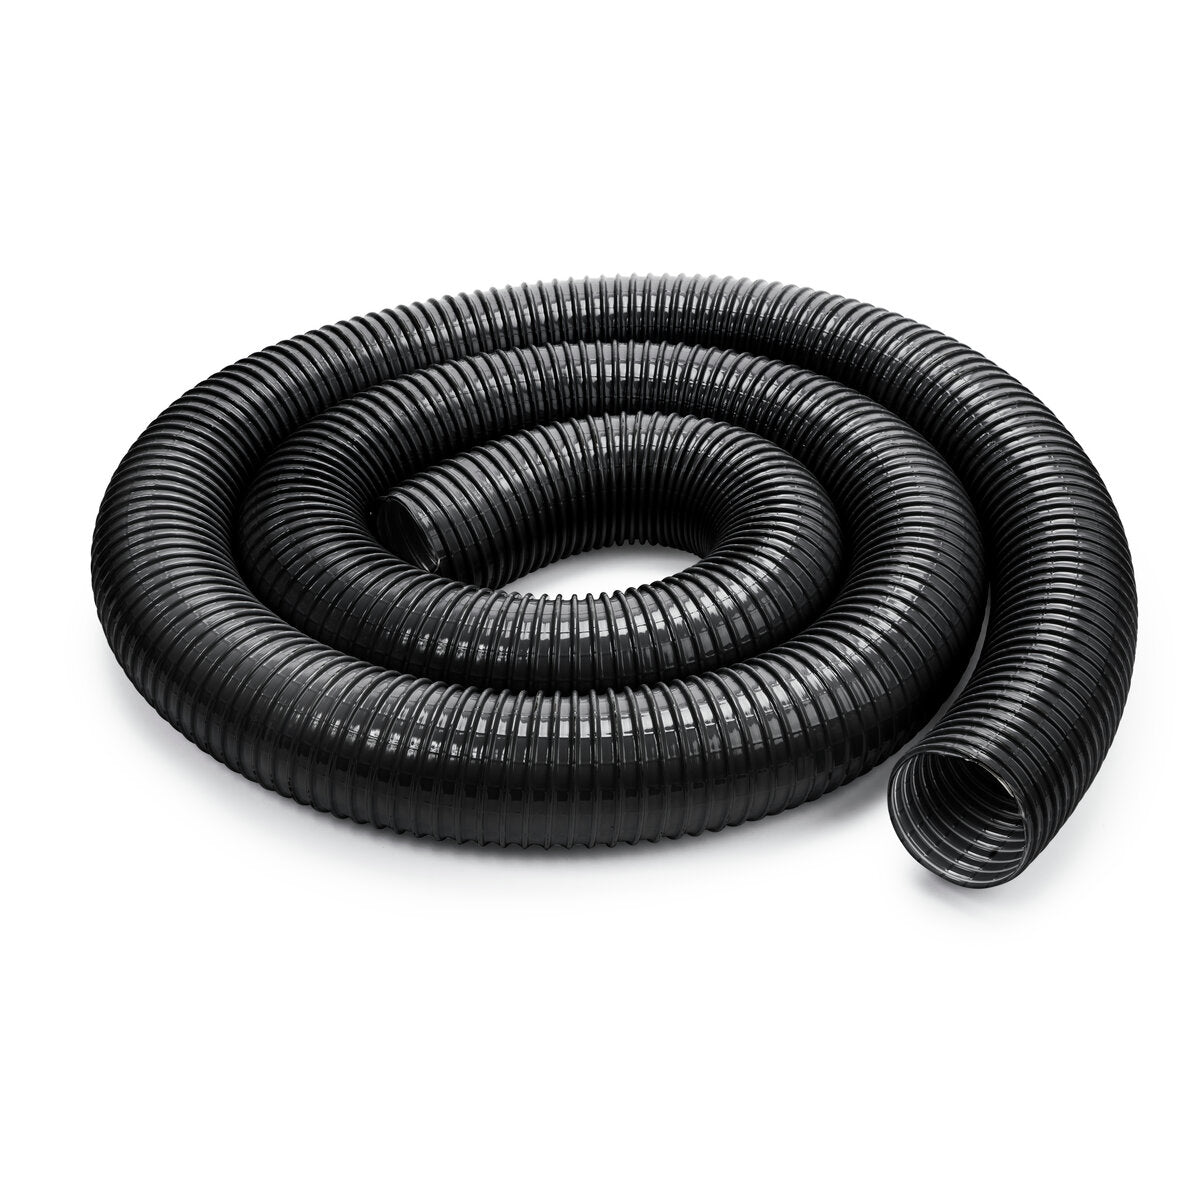 Lincoln Electric - Extraction Hose, 3 in. (76mm) Diameter (ID) x 8 ft. (2.5m) Length - K4114-8